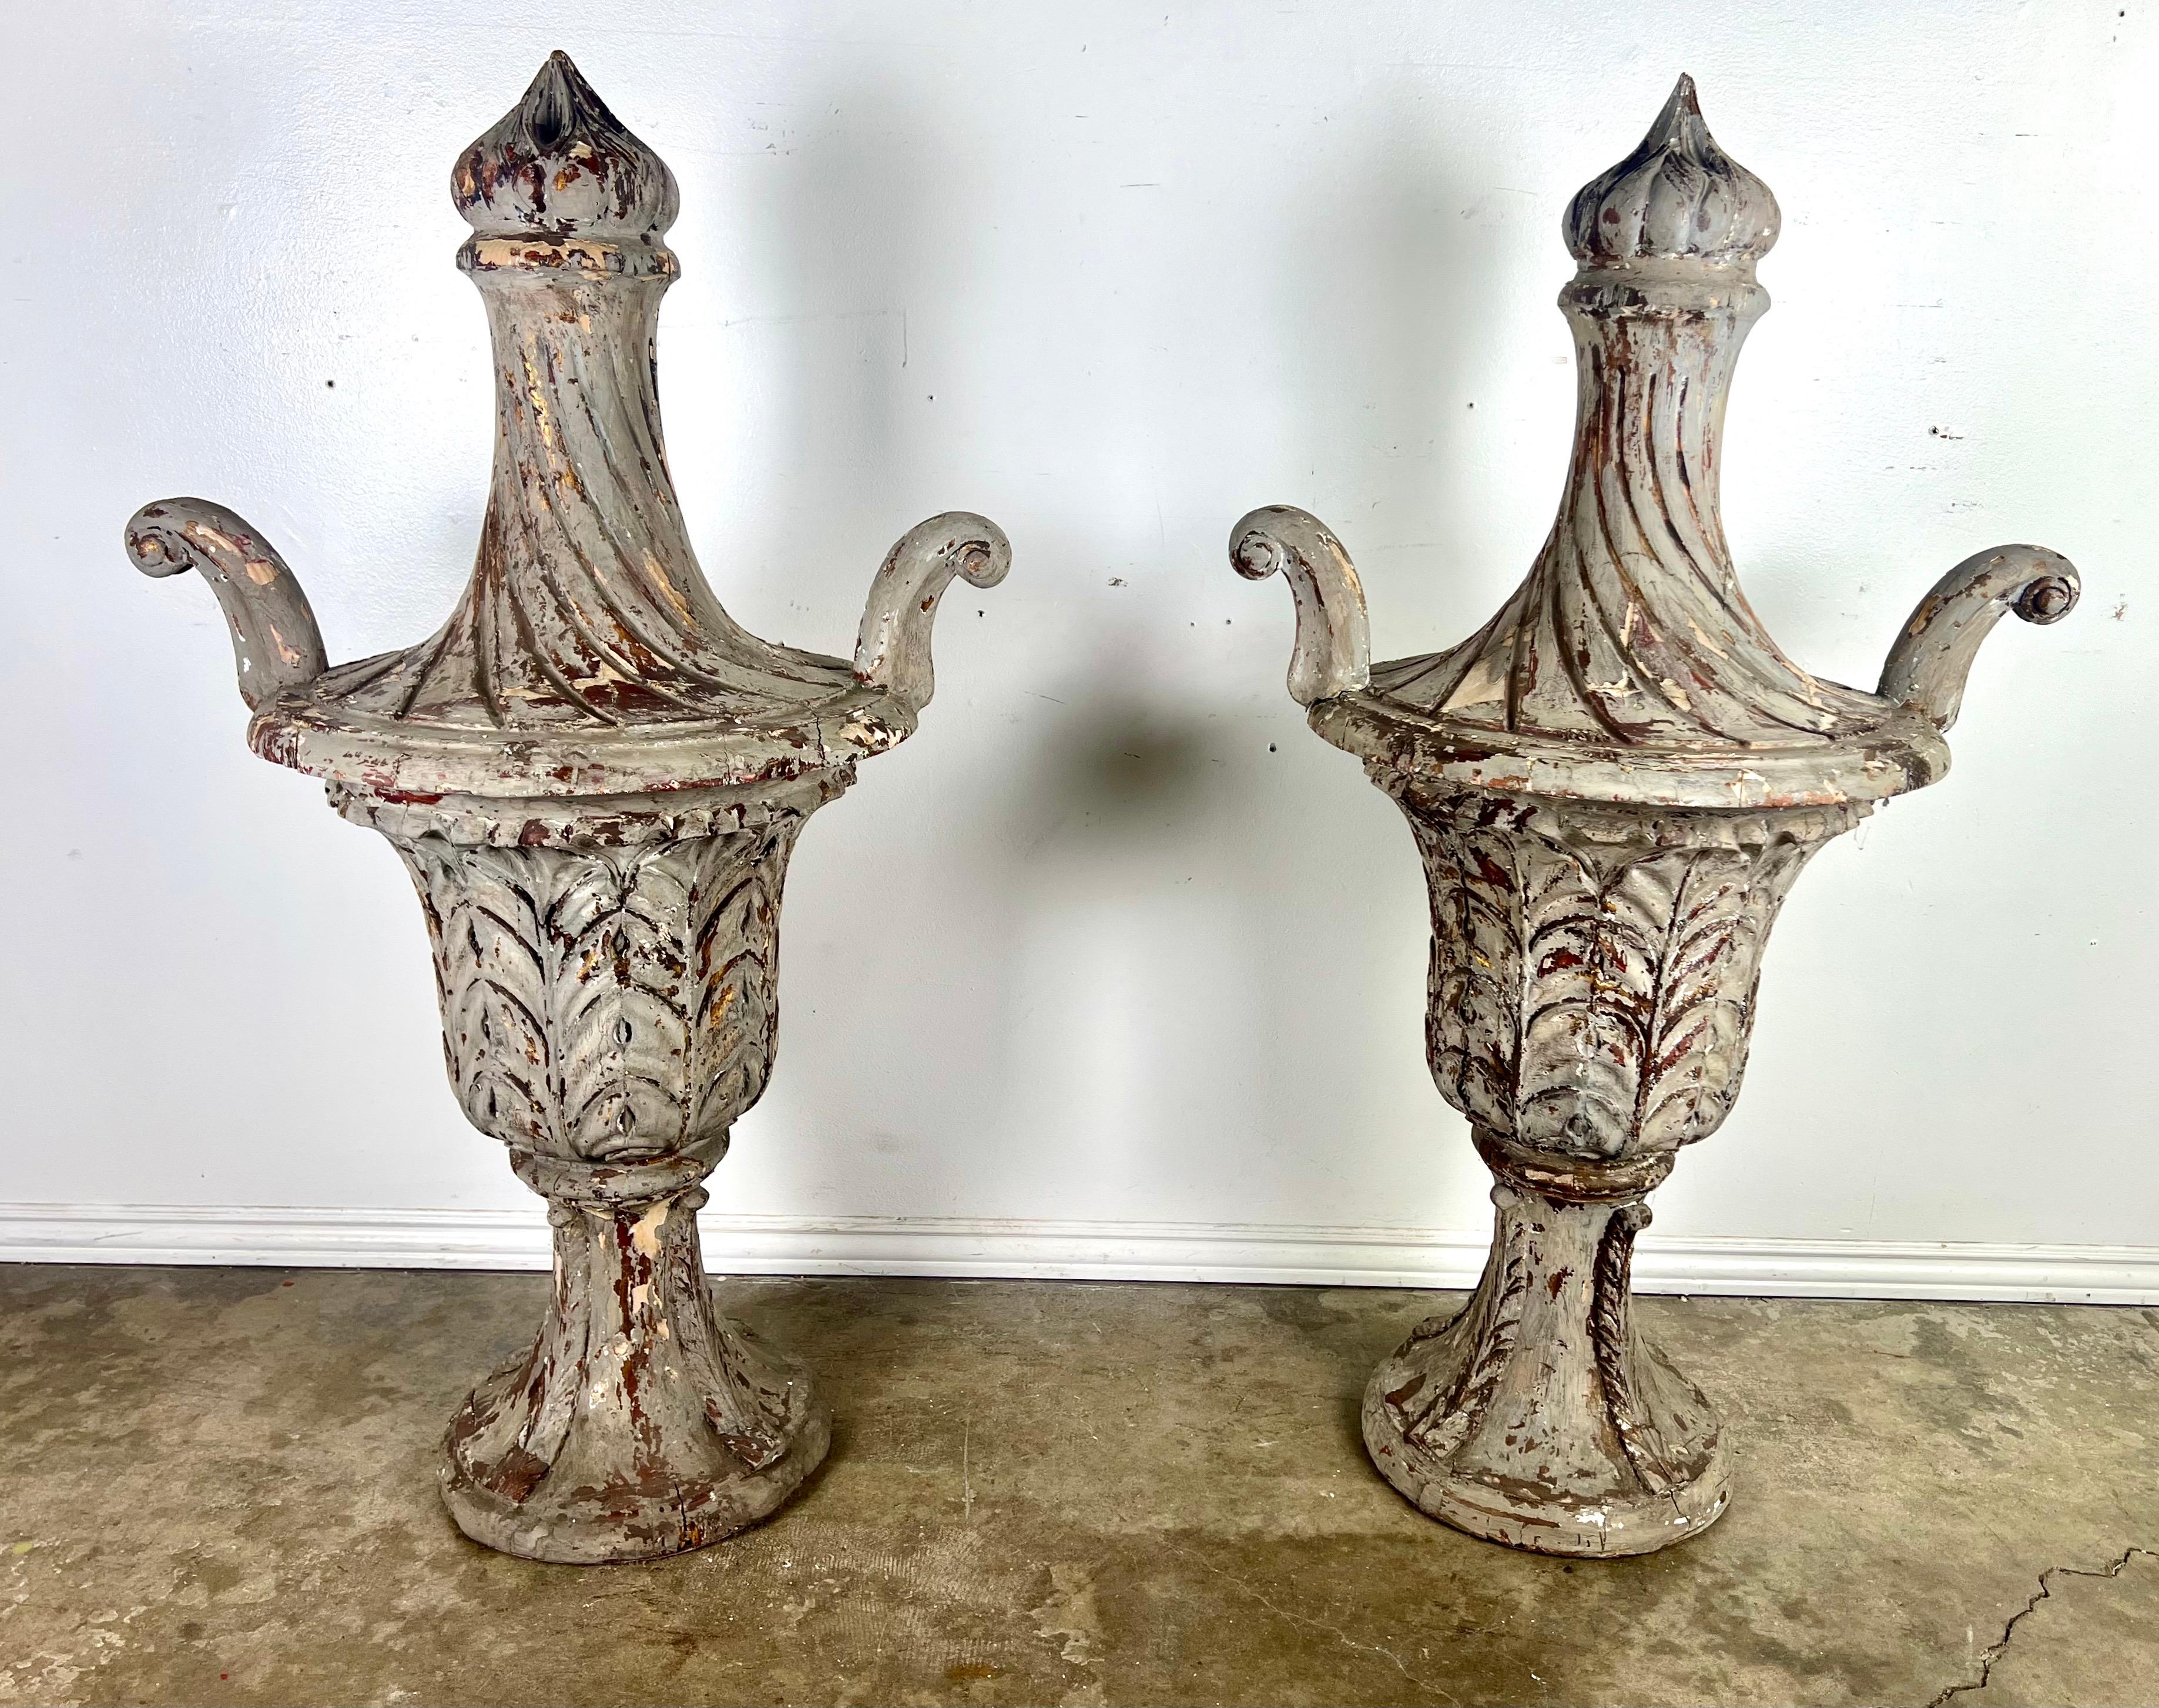 19th-century Italian neoclassical finials, each meticulously carved from wood, their design epitomizing the grandeur and refined aesthetics of the neoclassical movement.  These finials stand out with their distinct features: arms elegantly flared